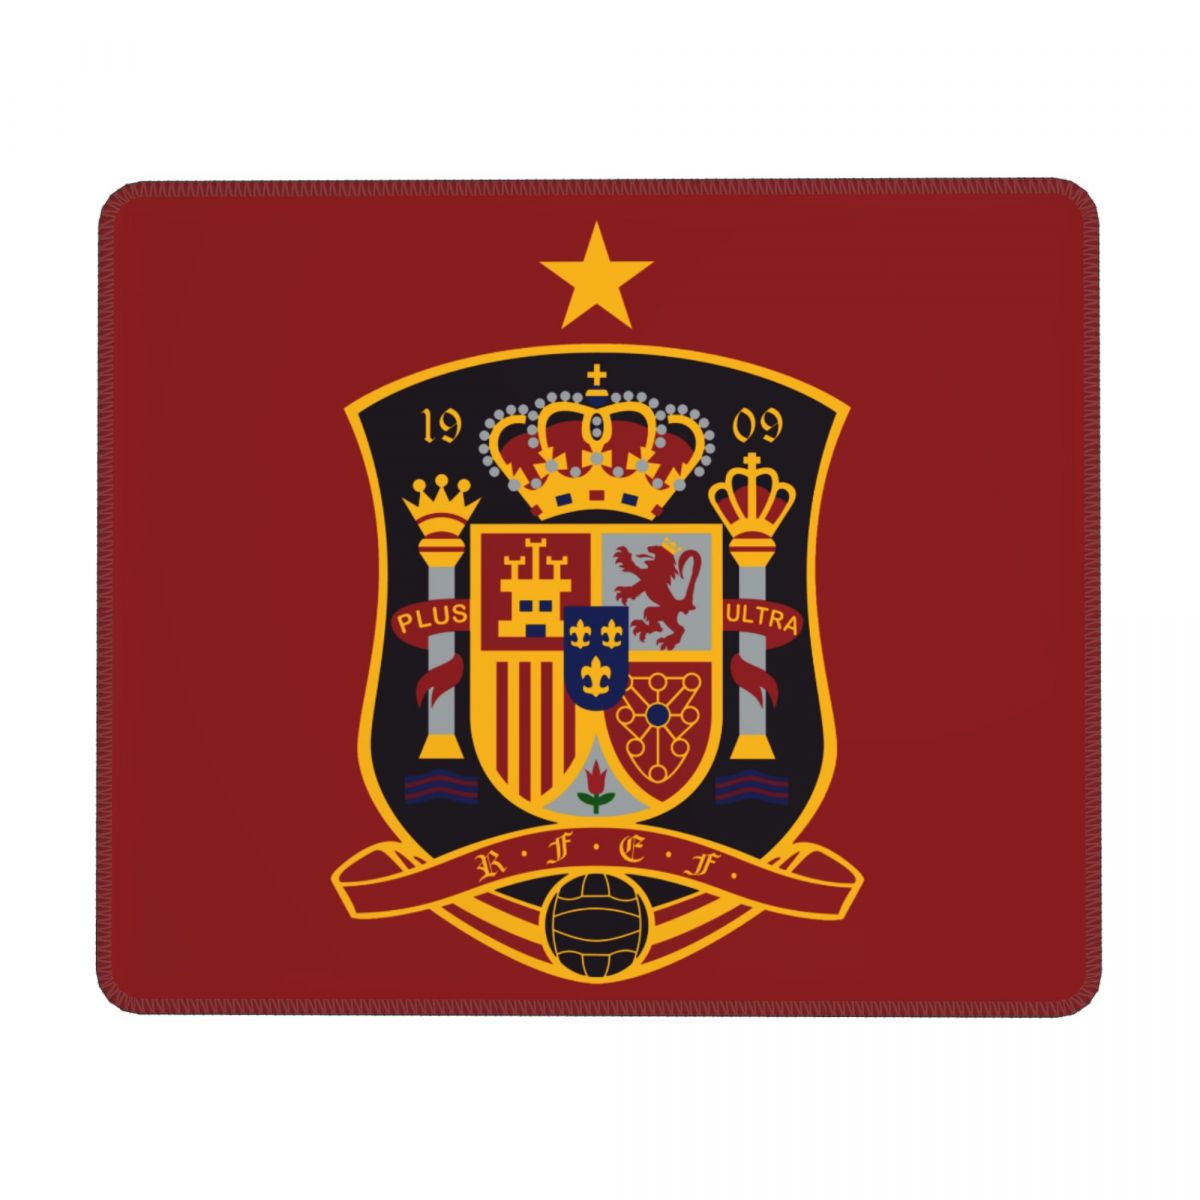 Spain National Football Team Square Rubber Base MousePads